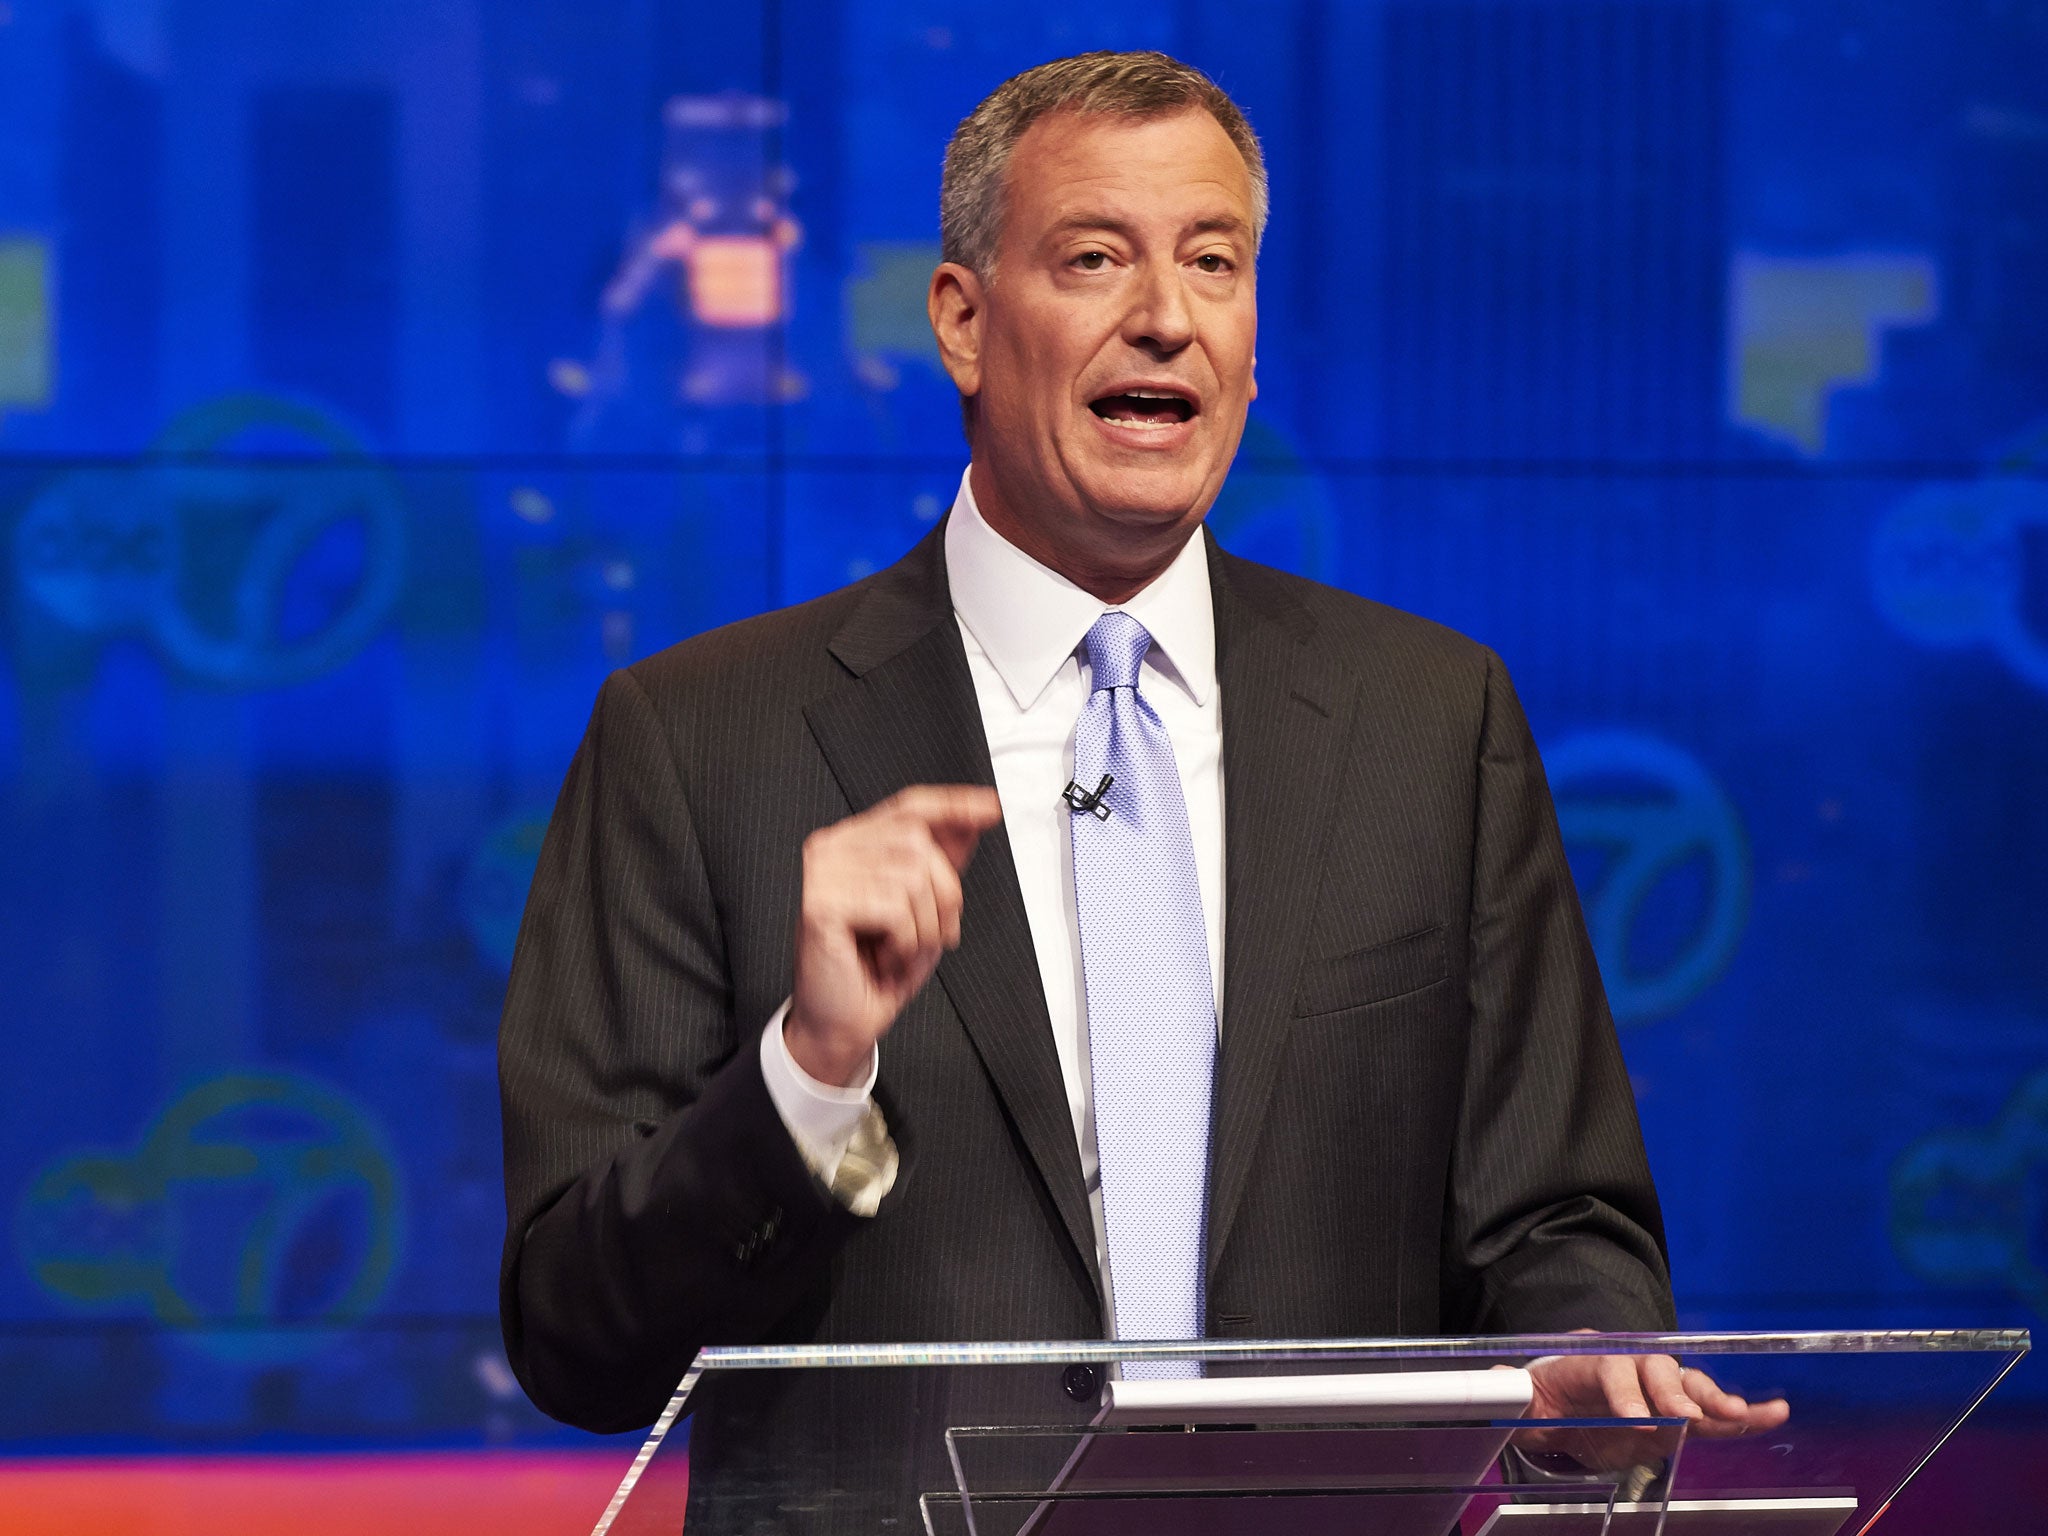 Tall order: de Blasio sees inequality as one of New York's biggest problems